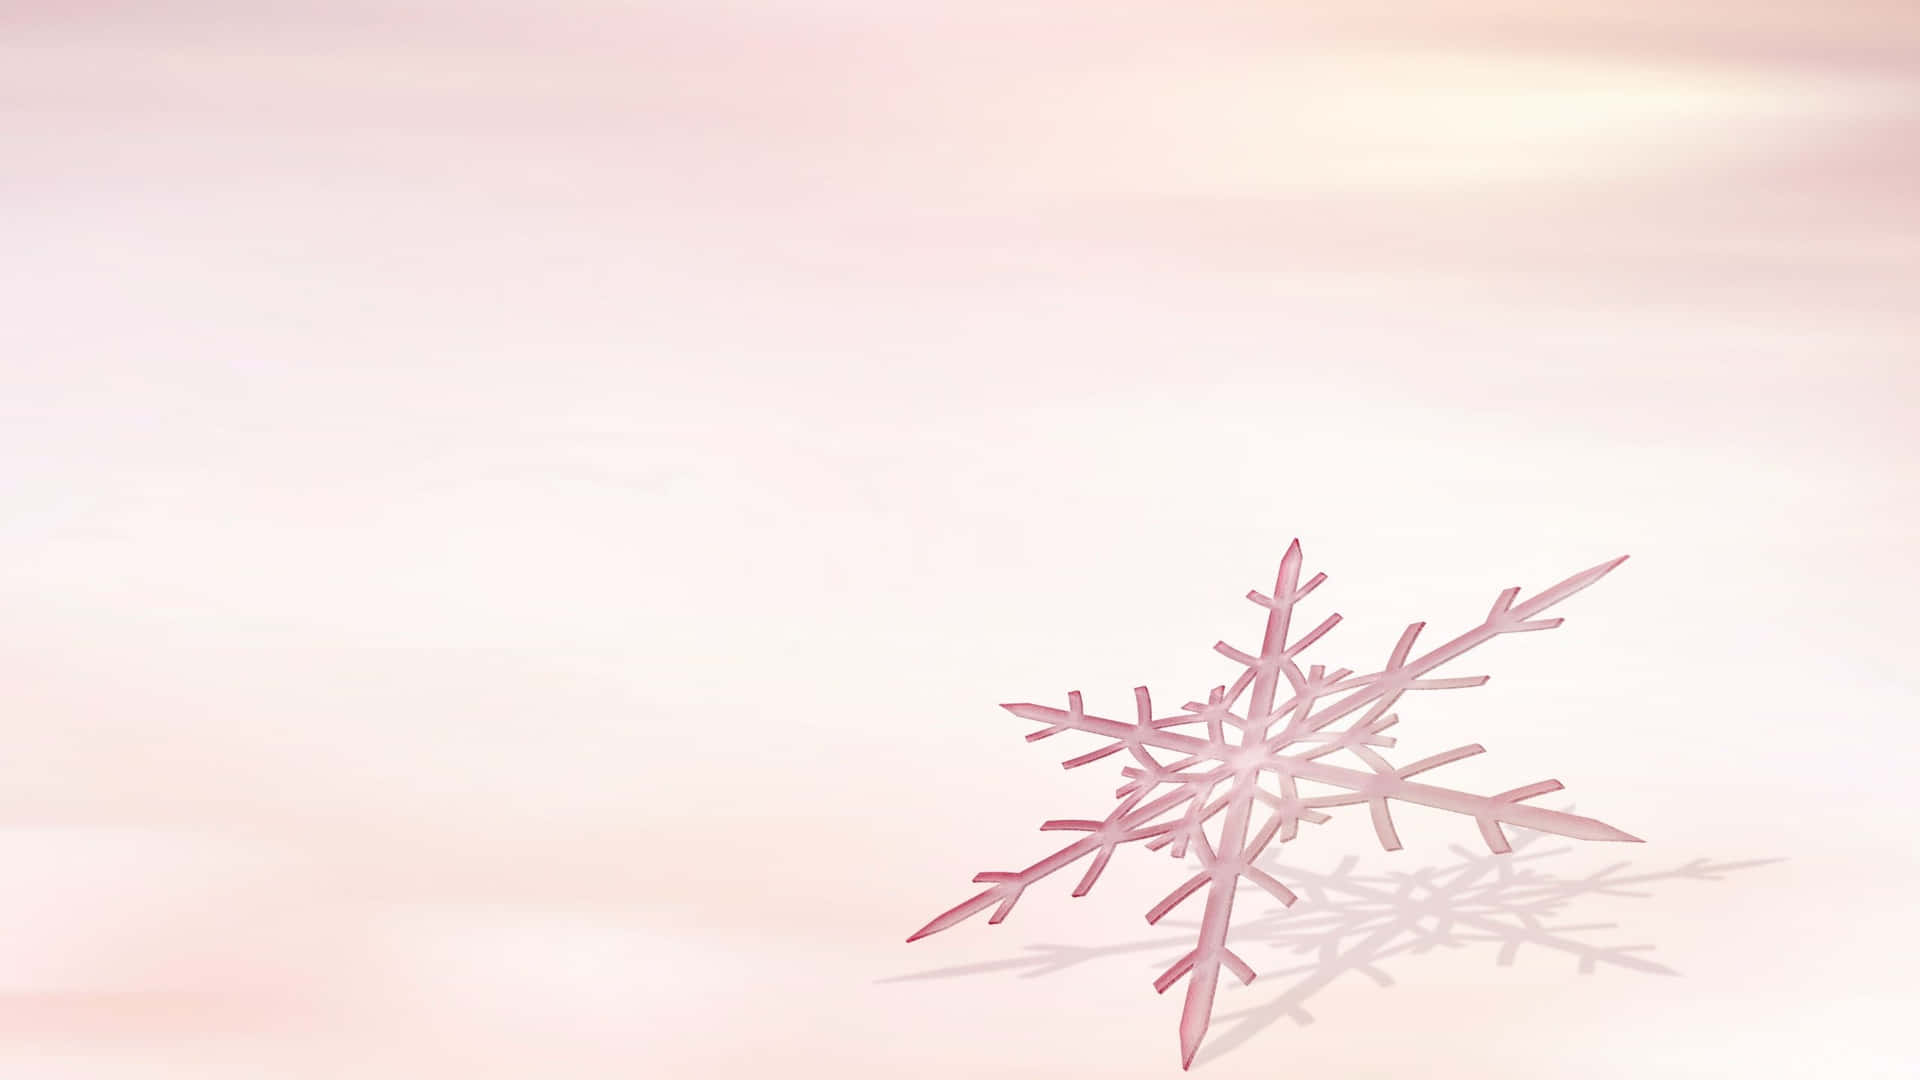 A pink snowflake on a pink background - Snowflake